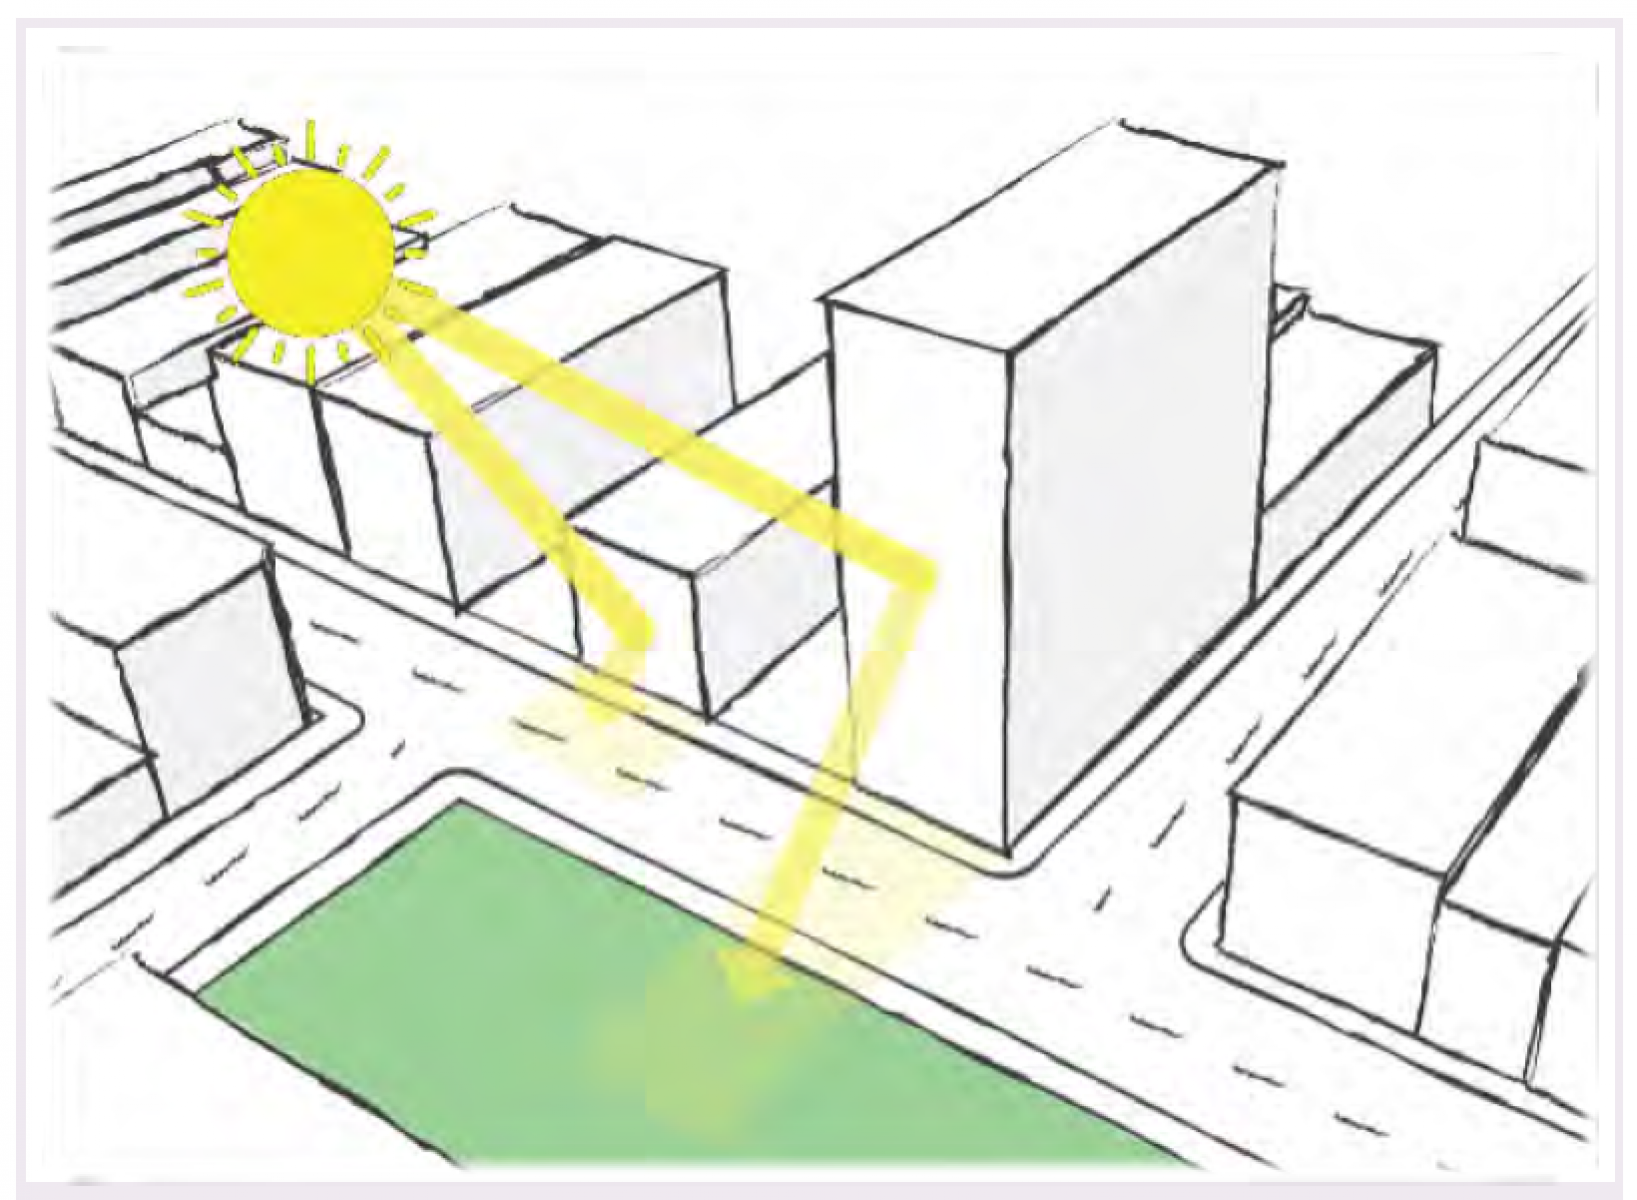 Reflected glare risk is greater for developments above four storeys and is typically associated with mid-rise and high-rise developments.